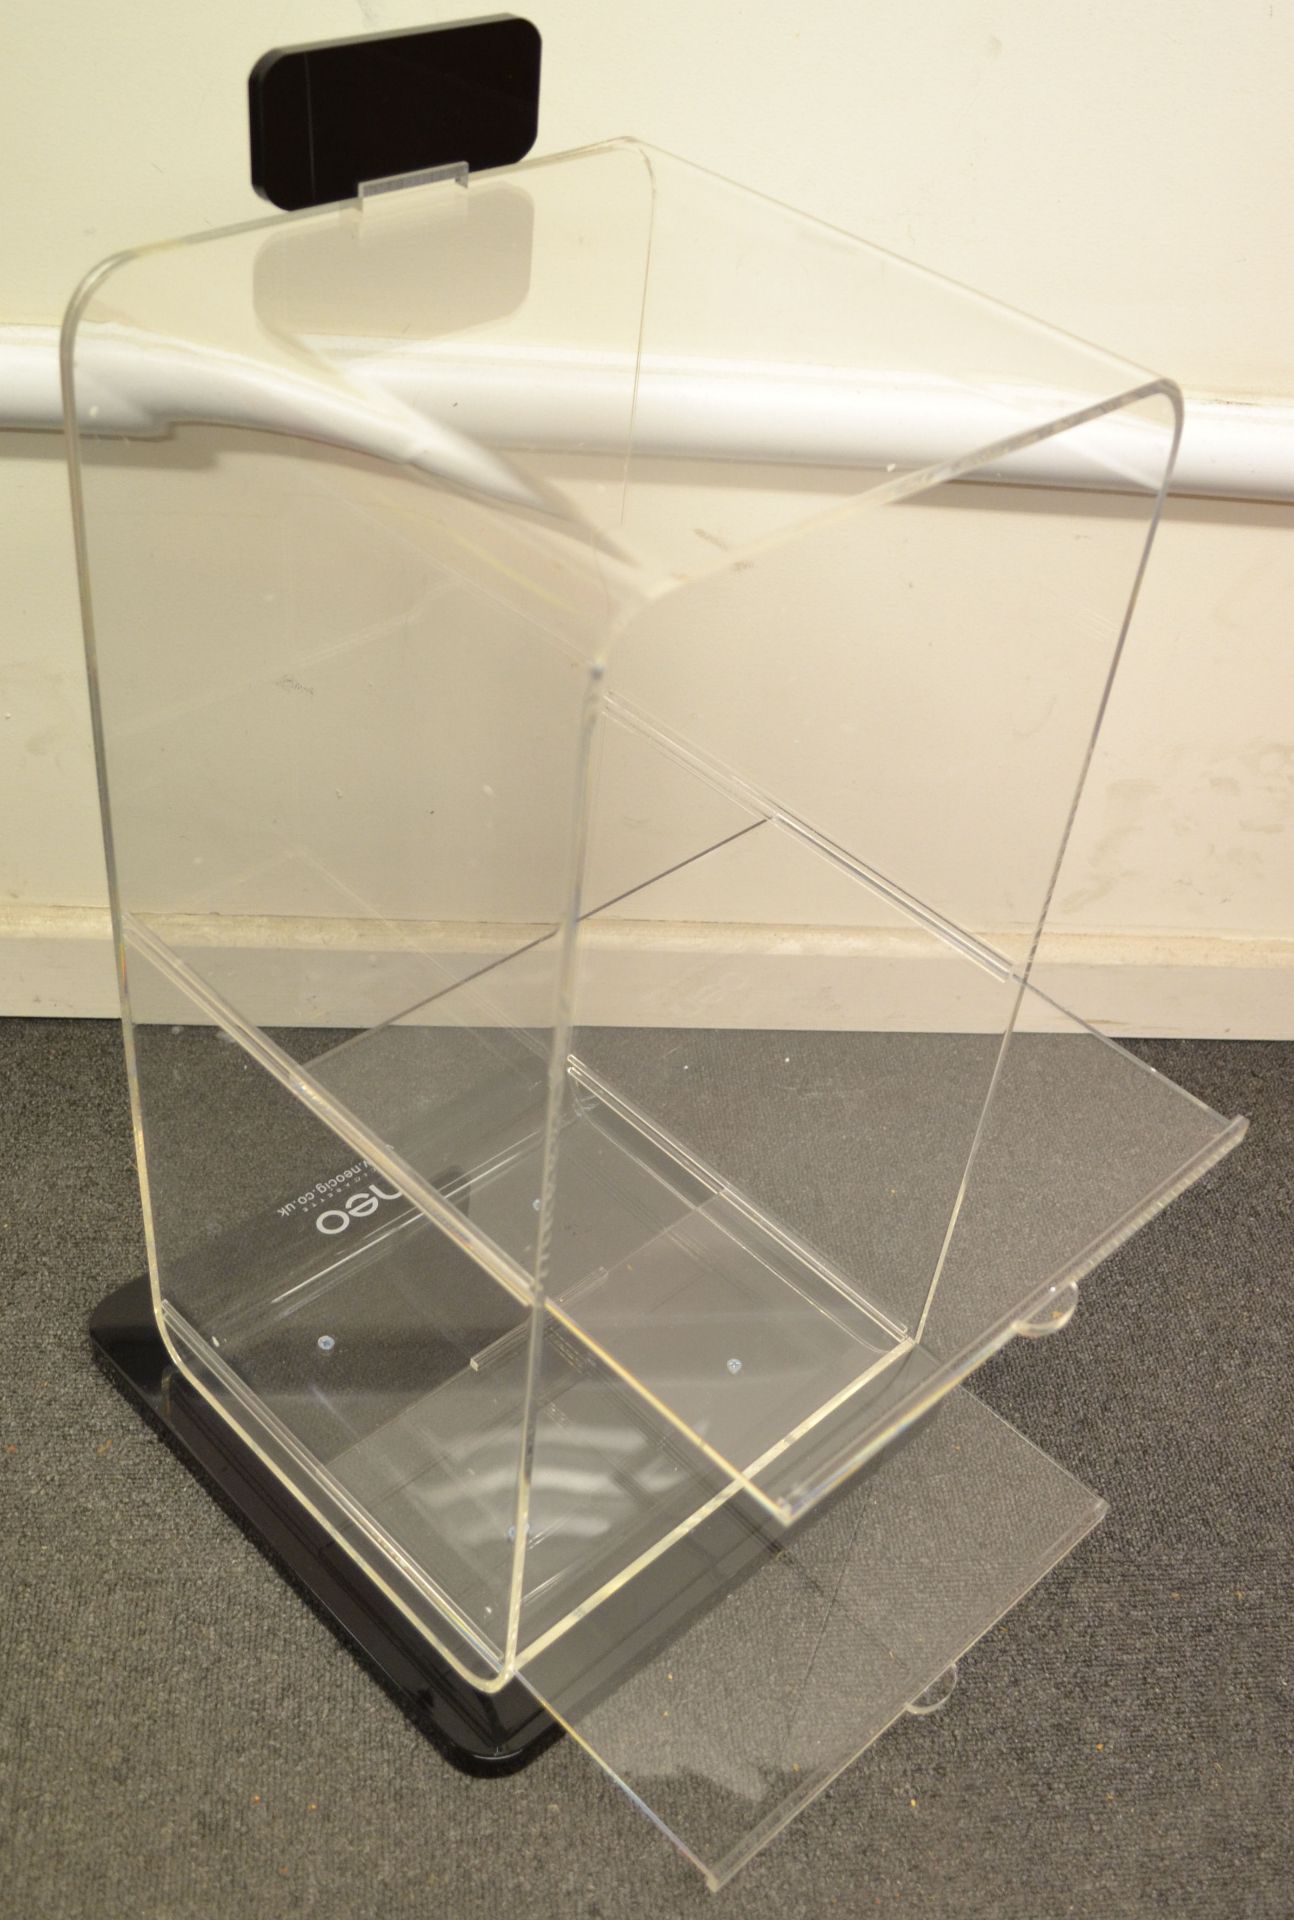 1 x Acrylic Counter Top Display Unit - New & Boxed - CL185 - Ref: DRTNEODSPLY - Location: Stoke ST3 - Bild 9 aus 9